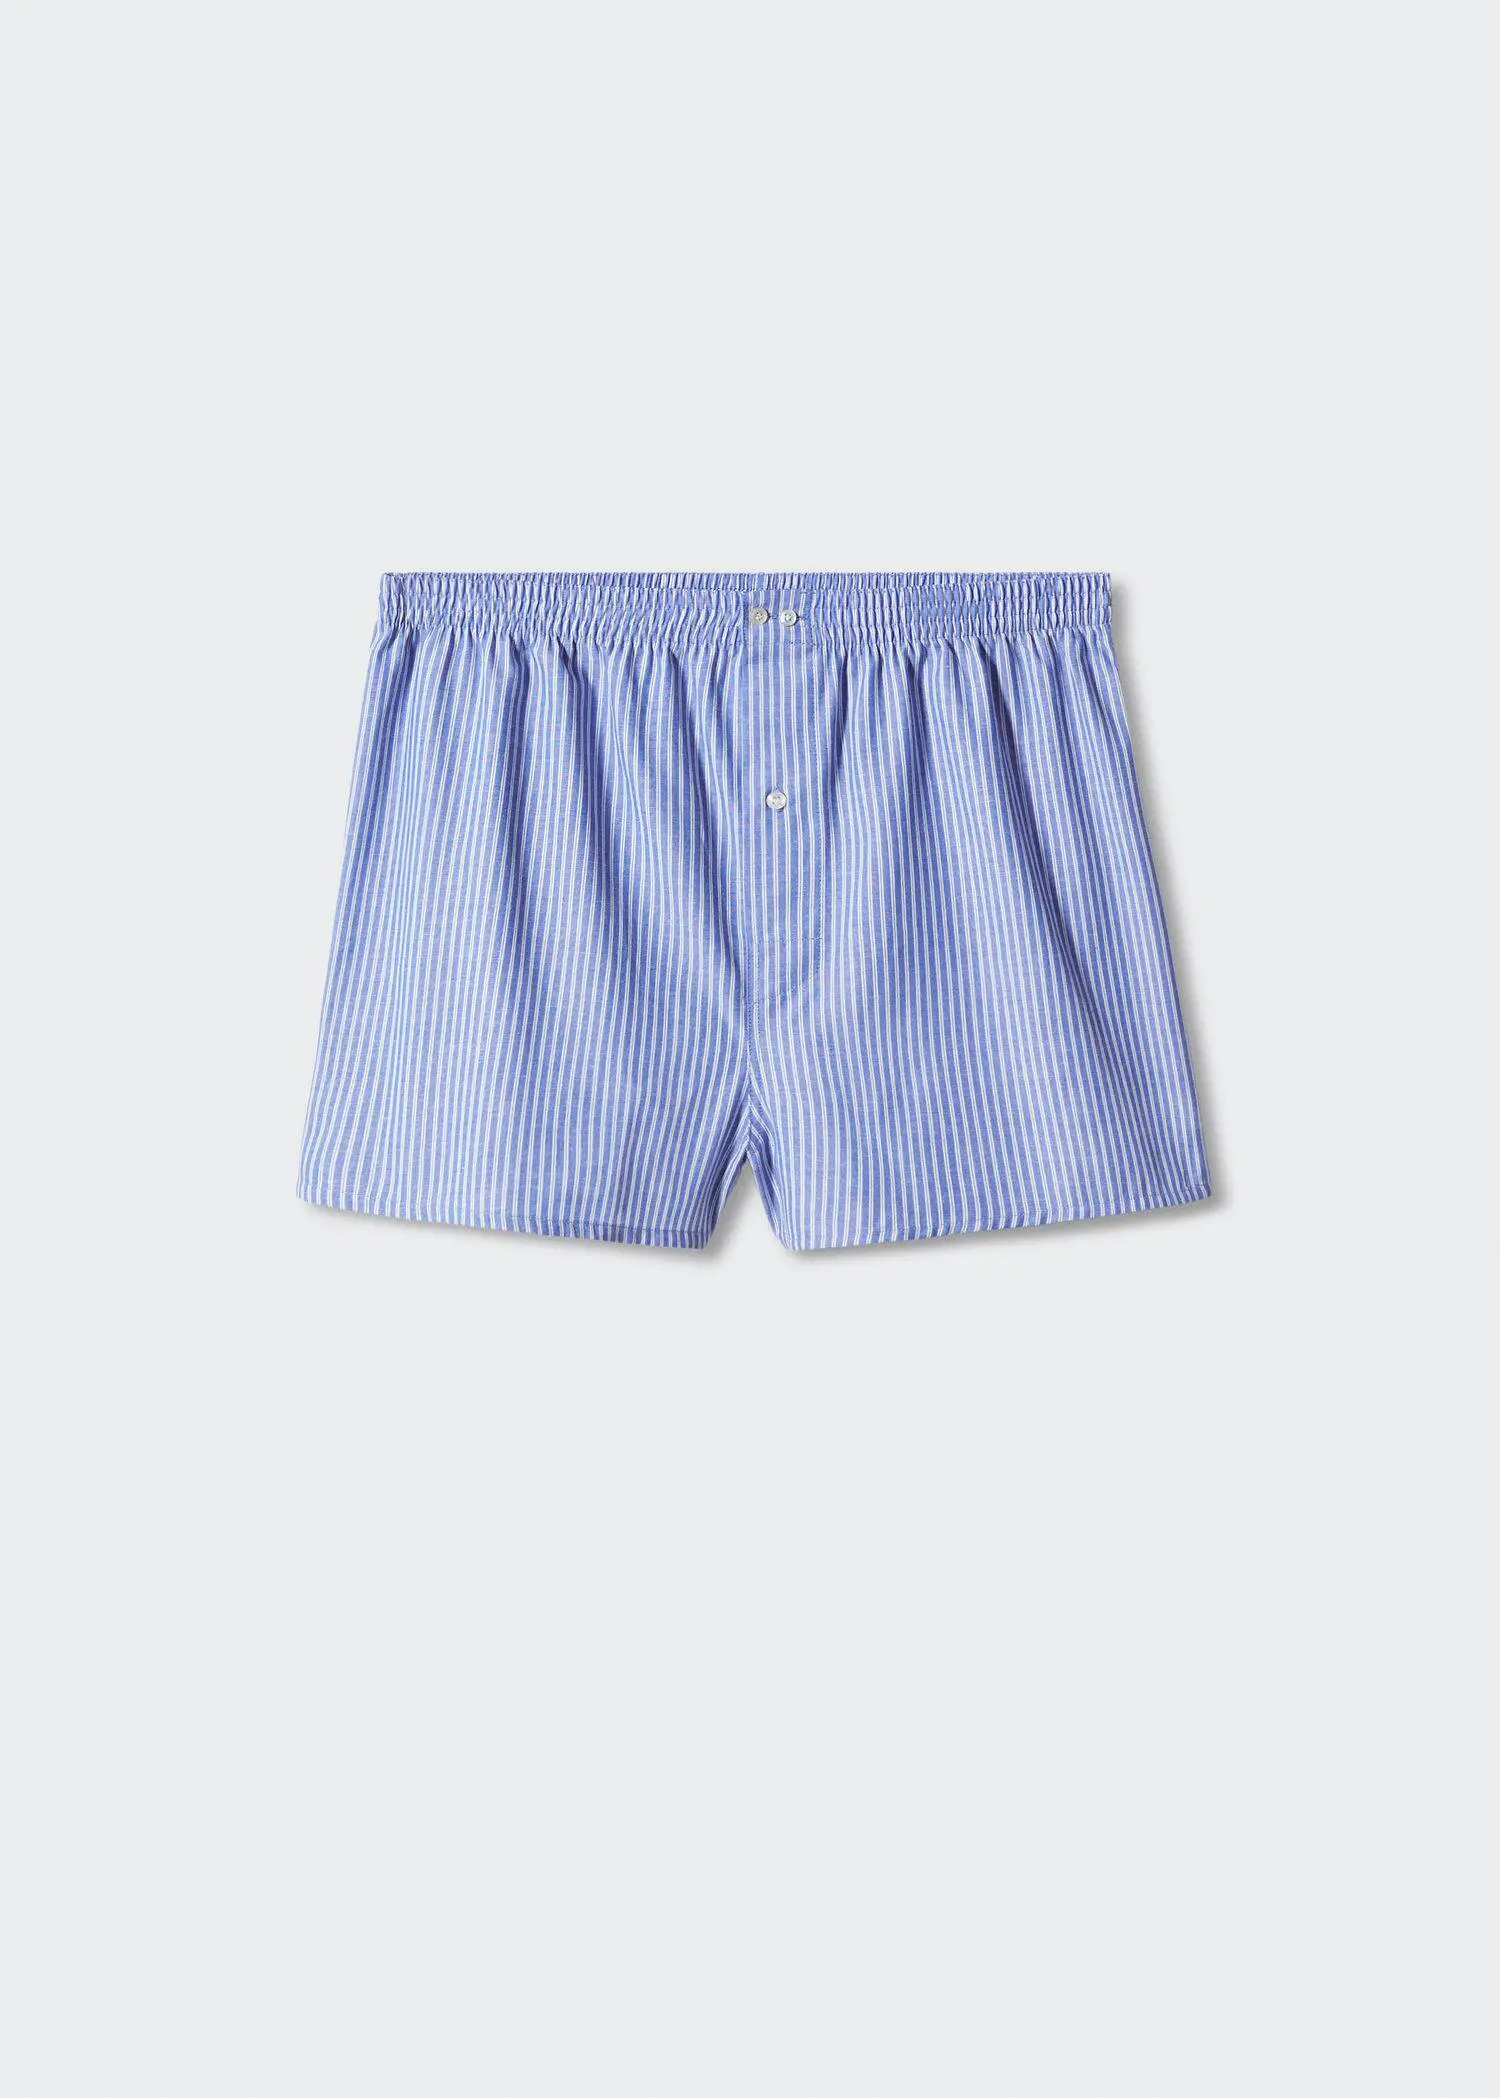 Mango 100% cotton striped briefs. a pair of blue striped boxers on a white background. 